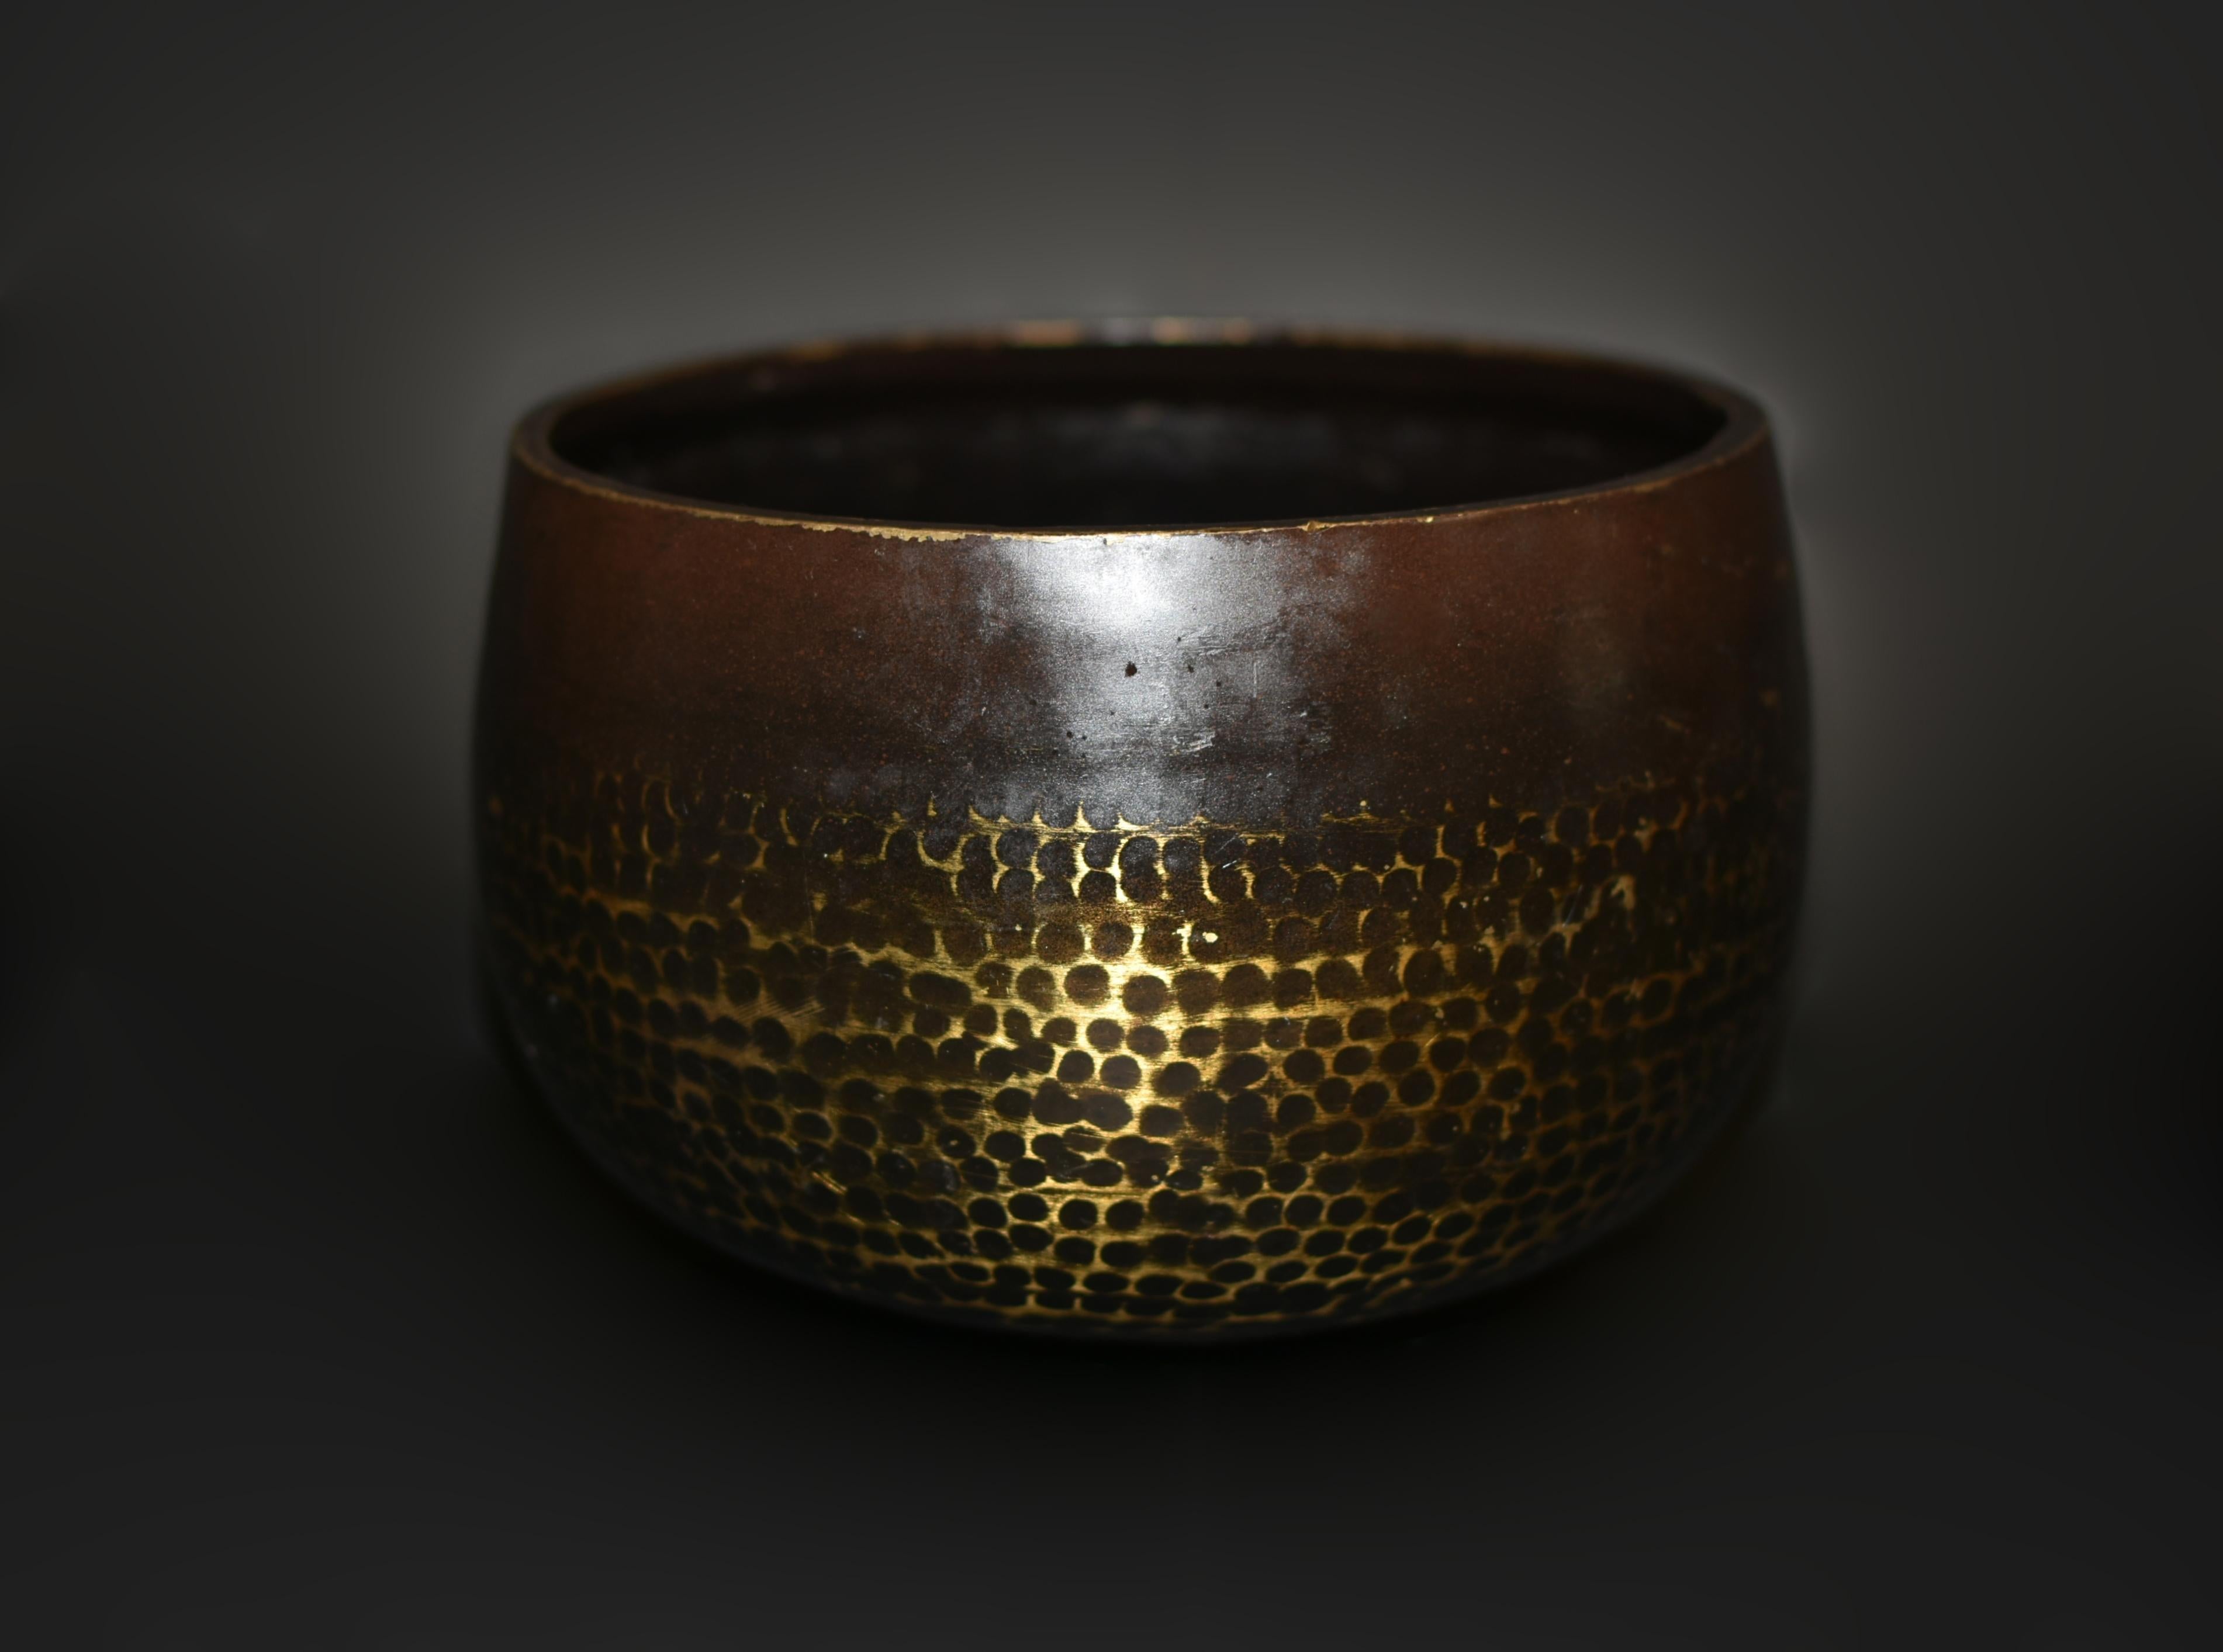 An early 20th century singing bowl crafted from solid bronze captures the eye with its hand-hammered surface revealing intricate gold divots. Emitting the harmonious B4 note, it resonates with the essence of the crown chakra, fostering a profound